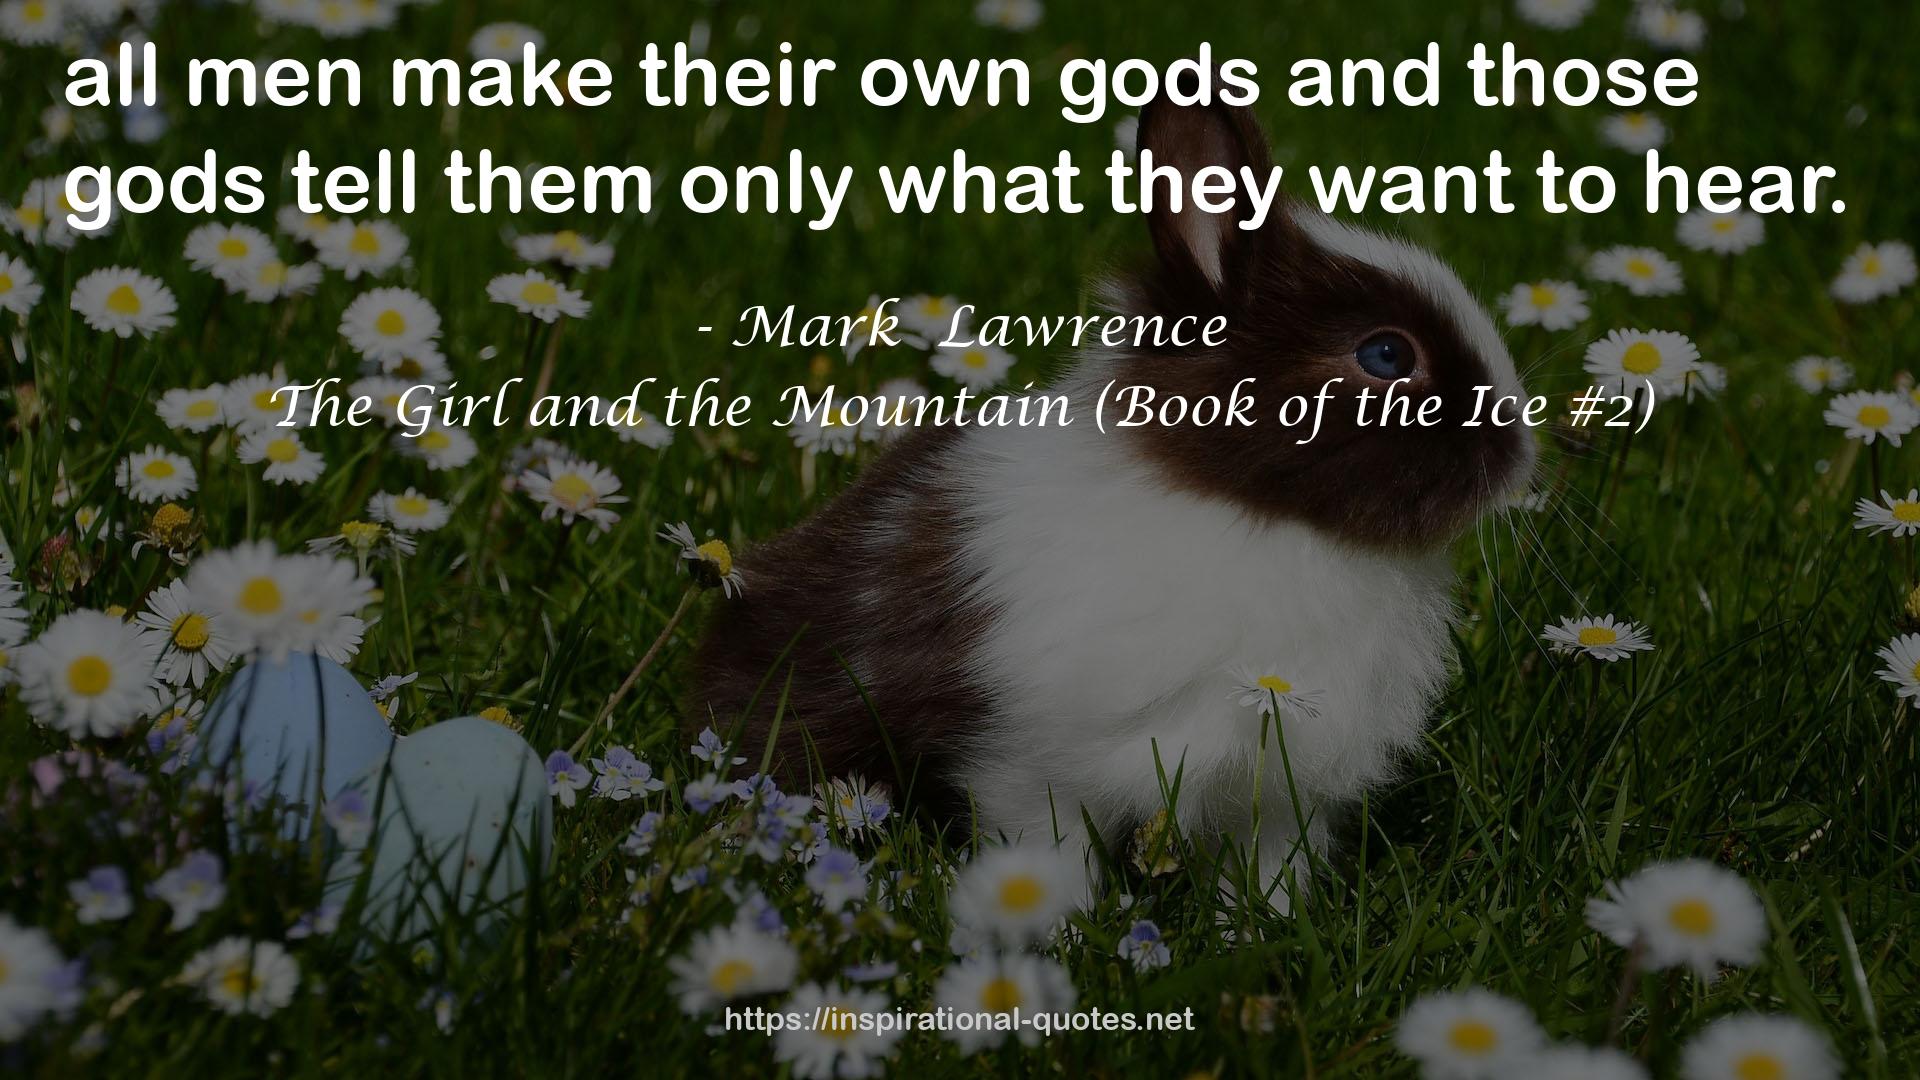 The Girl and the Mountain (Book of the Ice #2) QUOTES